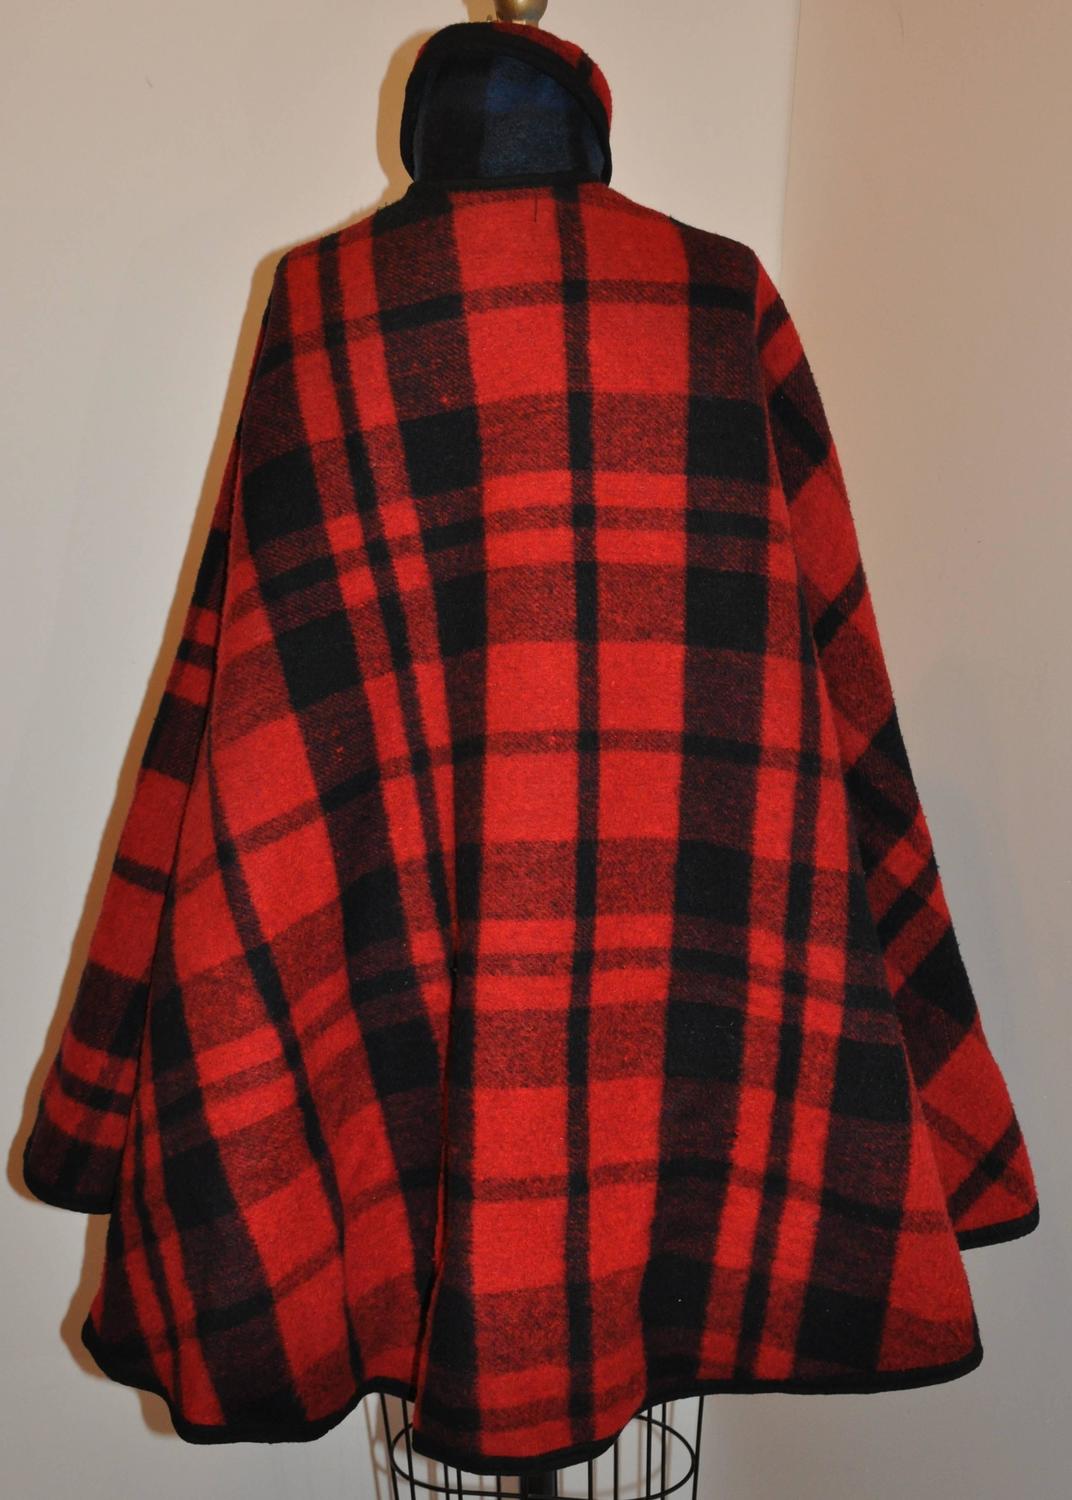 Pendleton Reversible Double-Faced Wool Plaid Poncho For Sale at 1stdibs